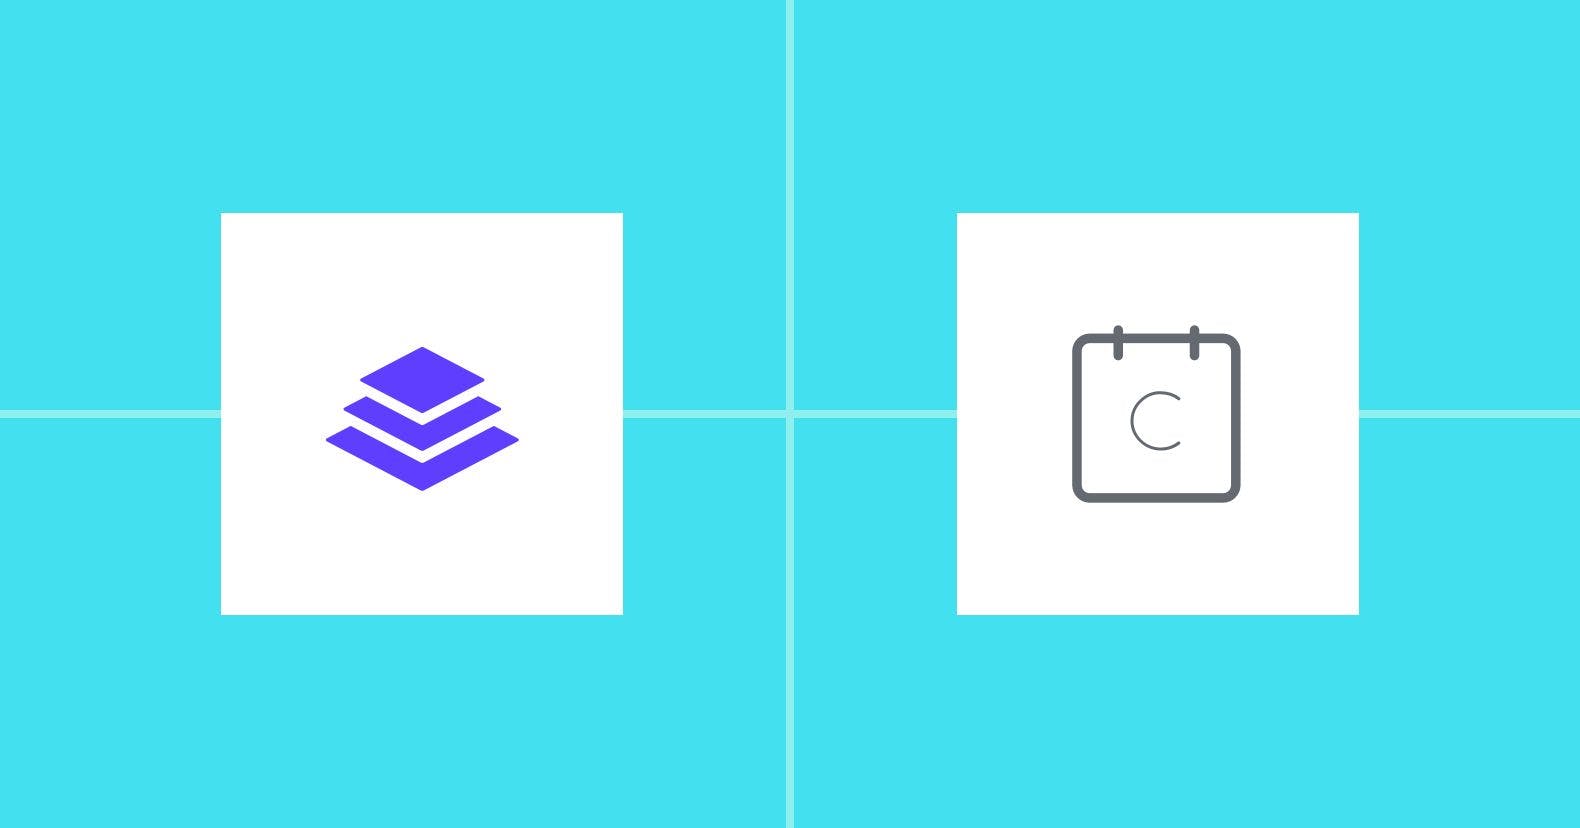 Leadpages integrates with Calendly